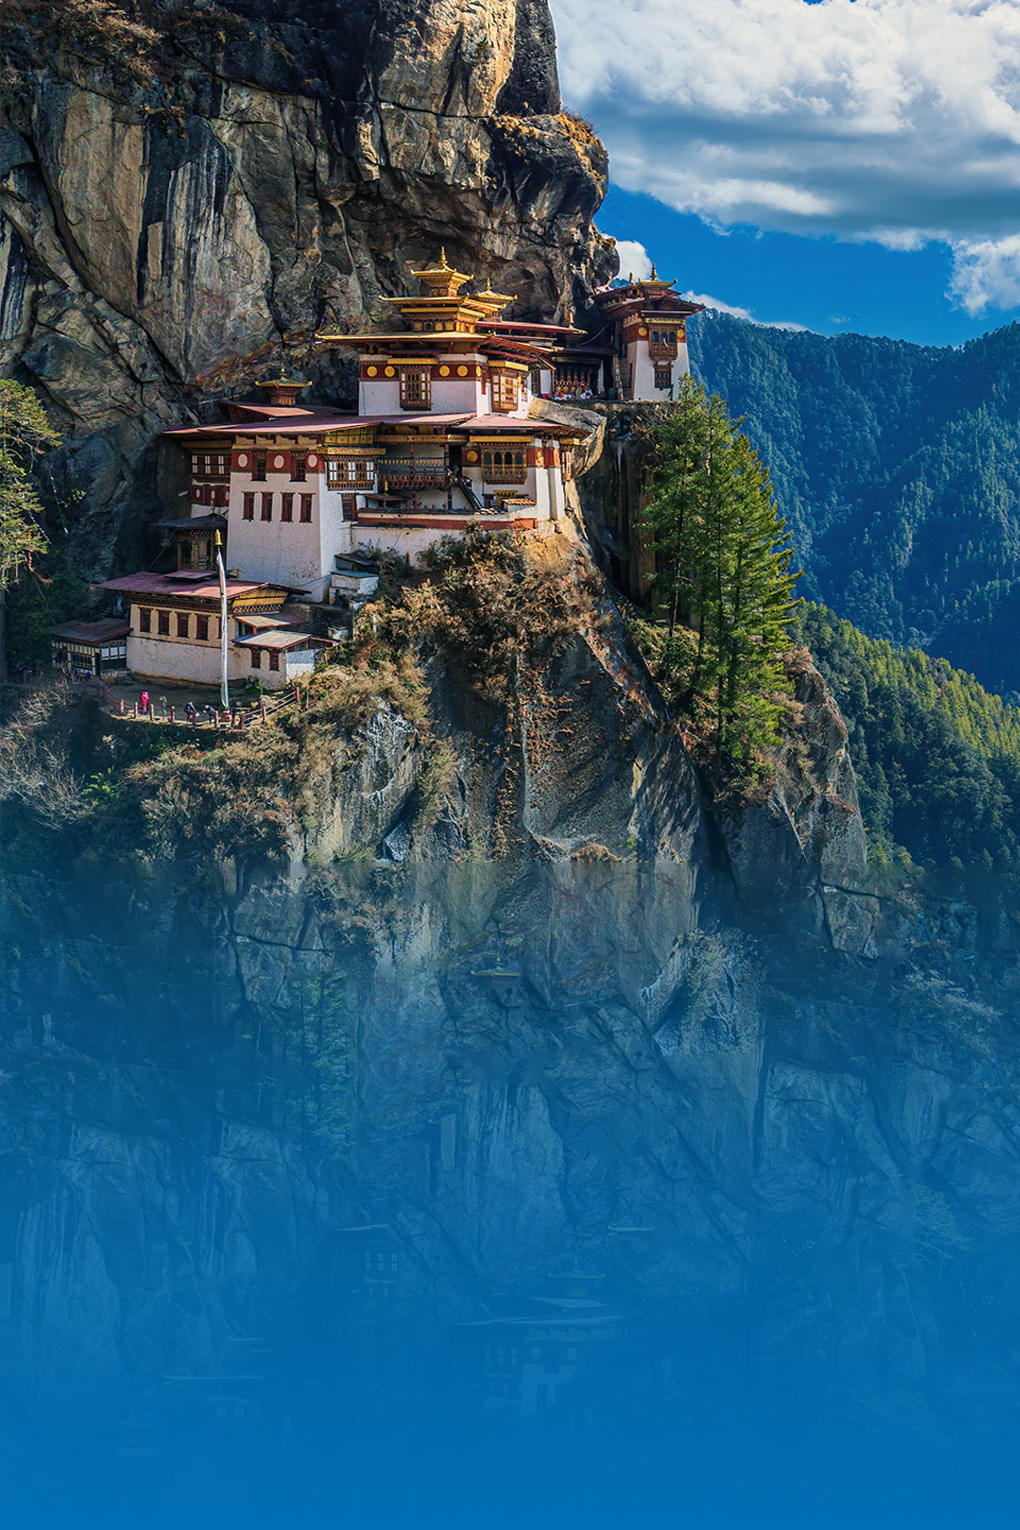 Vacation in Bhutan | FREE Excursion to Taktsang